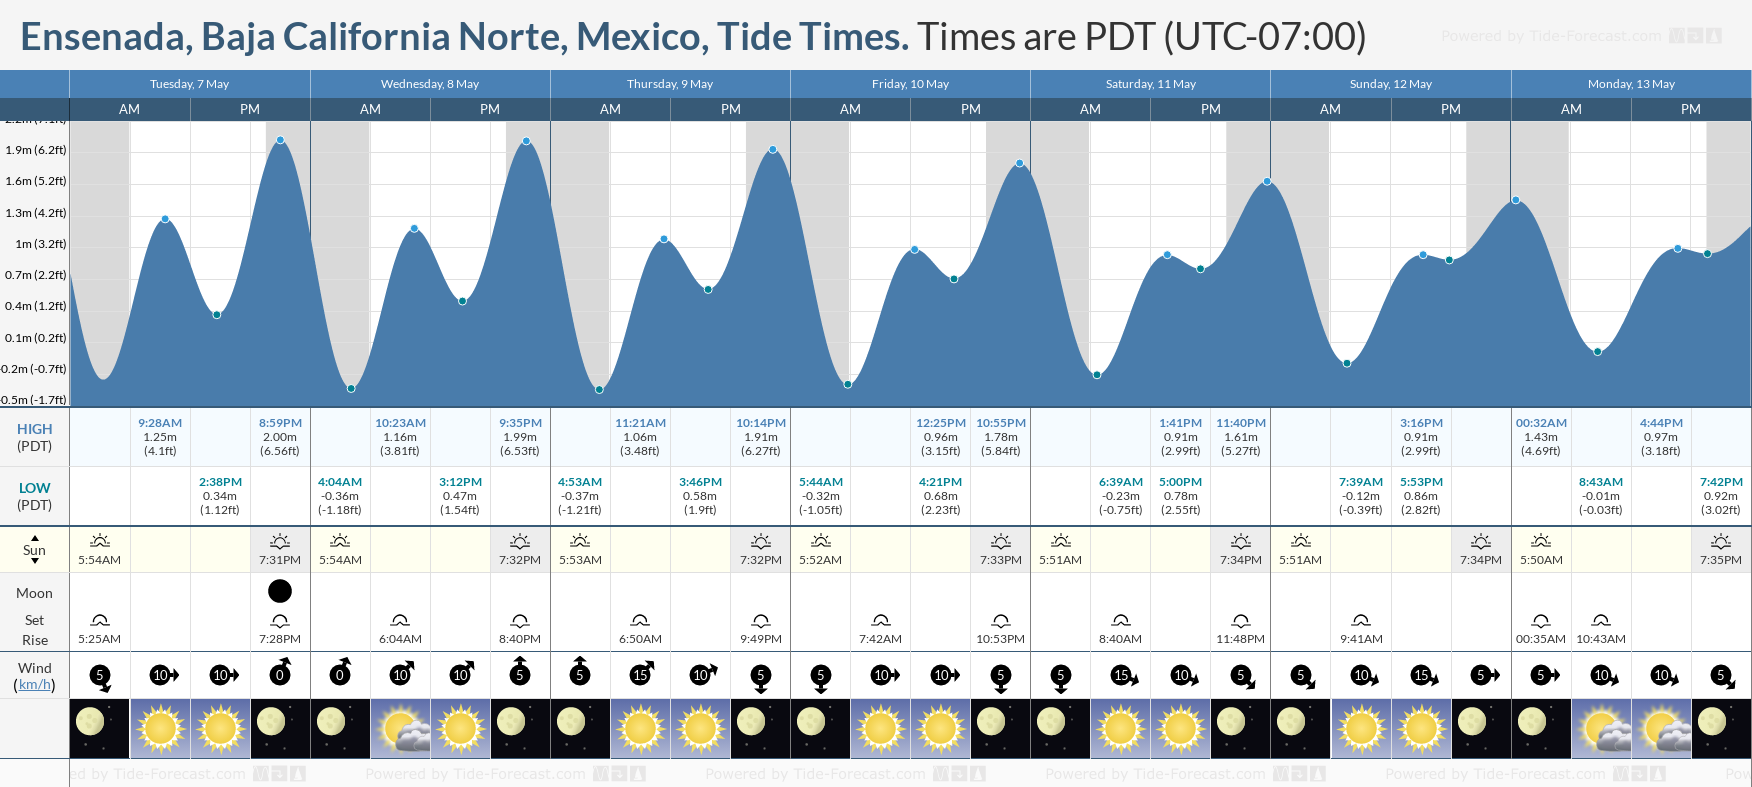 Ensenada, Baja California Norte, Mexico Tide Chart including high and low tide tide times for the next 7 days